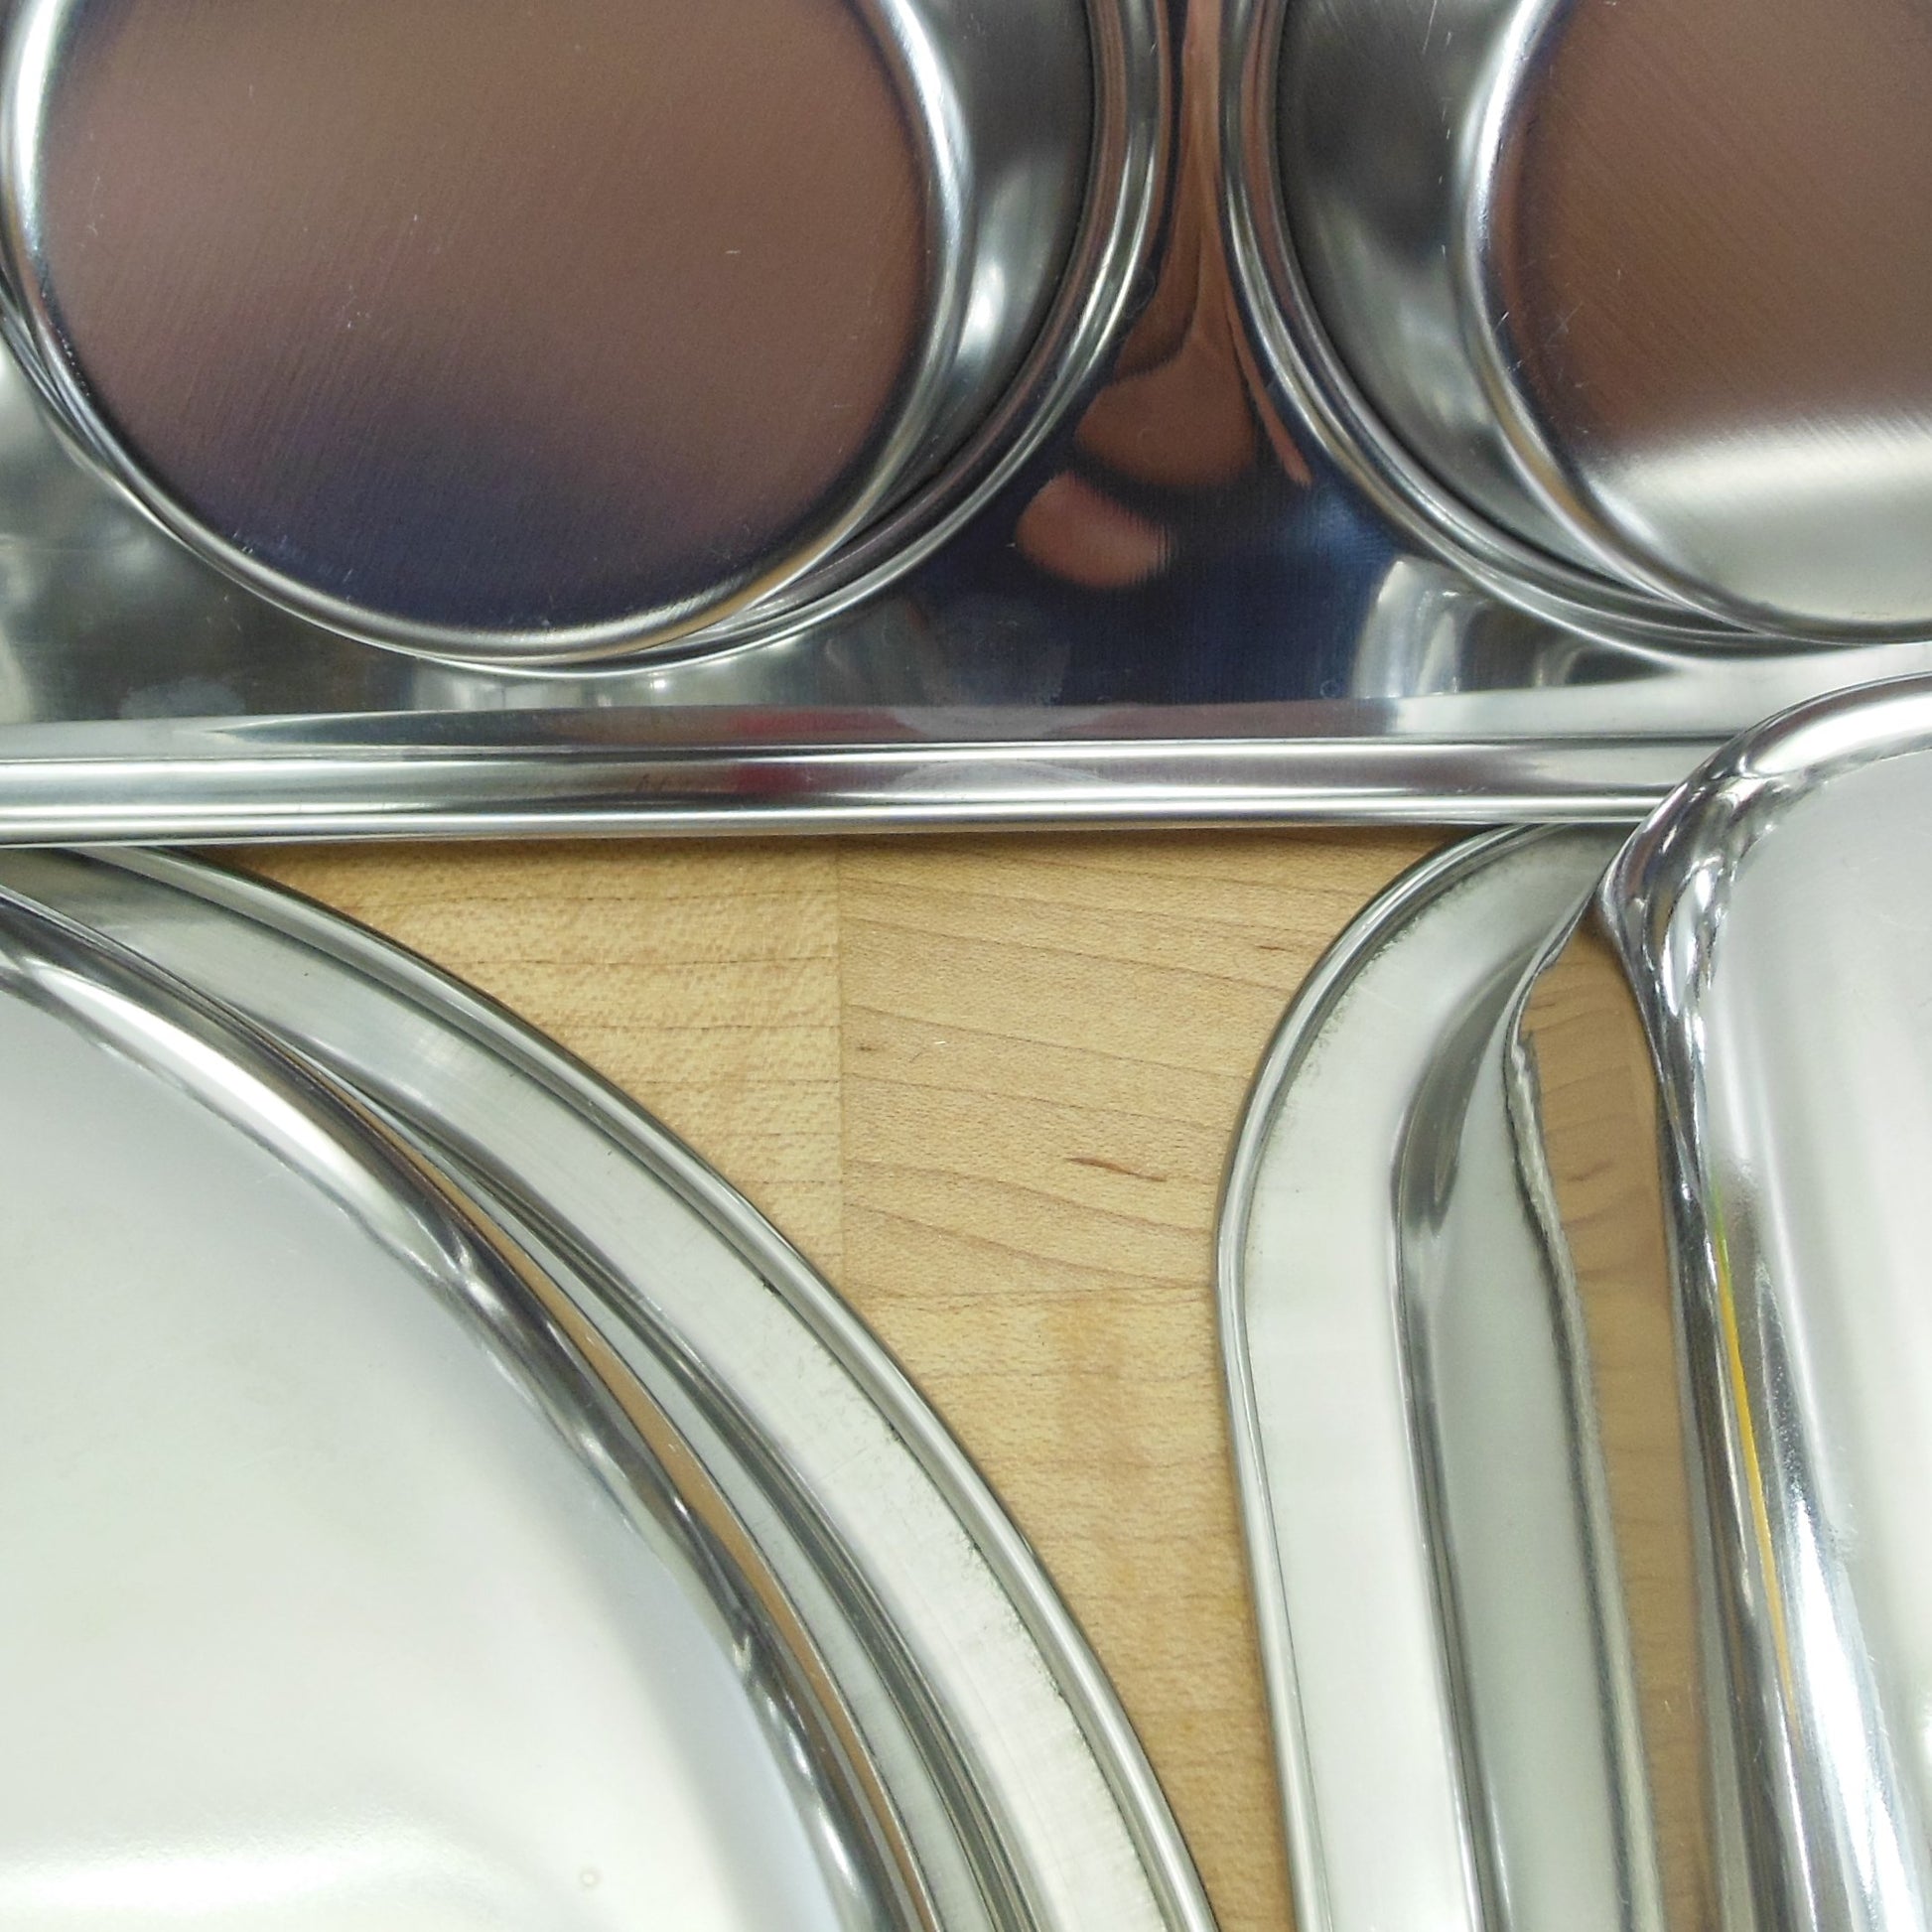 Mirror Stainless Steel Unbranded Trio Cake/Pie, Loaf & Muffin Pans Flat Rim